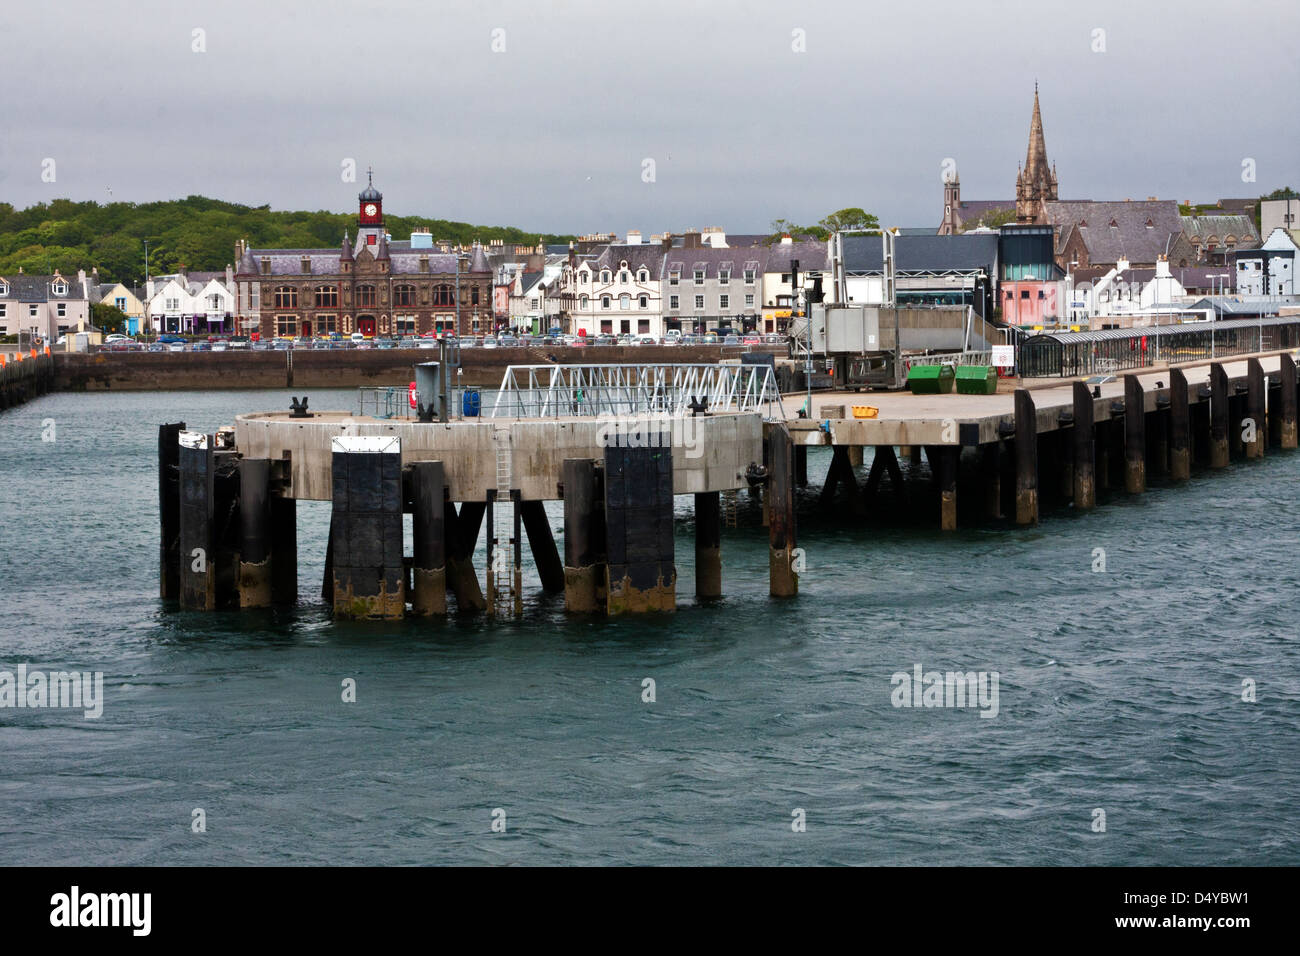 The harbour, wharfs and docks of Stornoway on the Isle of Lewis, Outer Hebrides, Scotland, Stock Photo